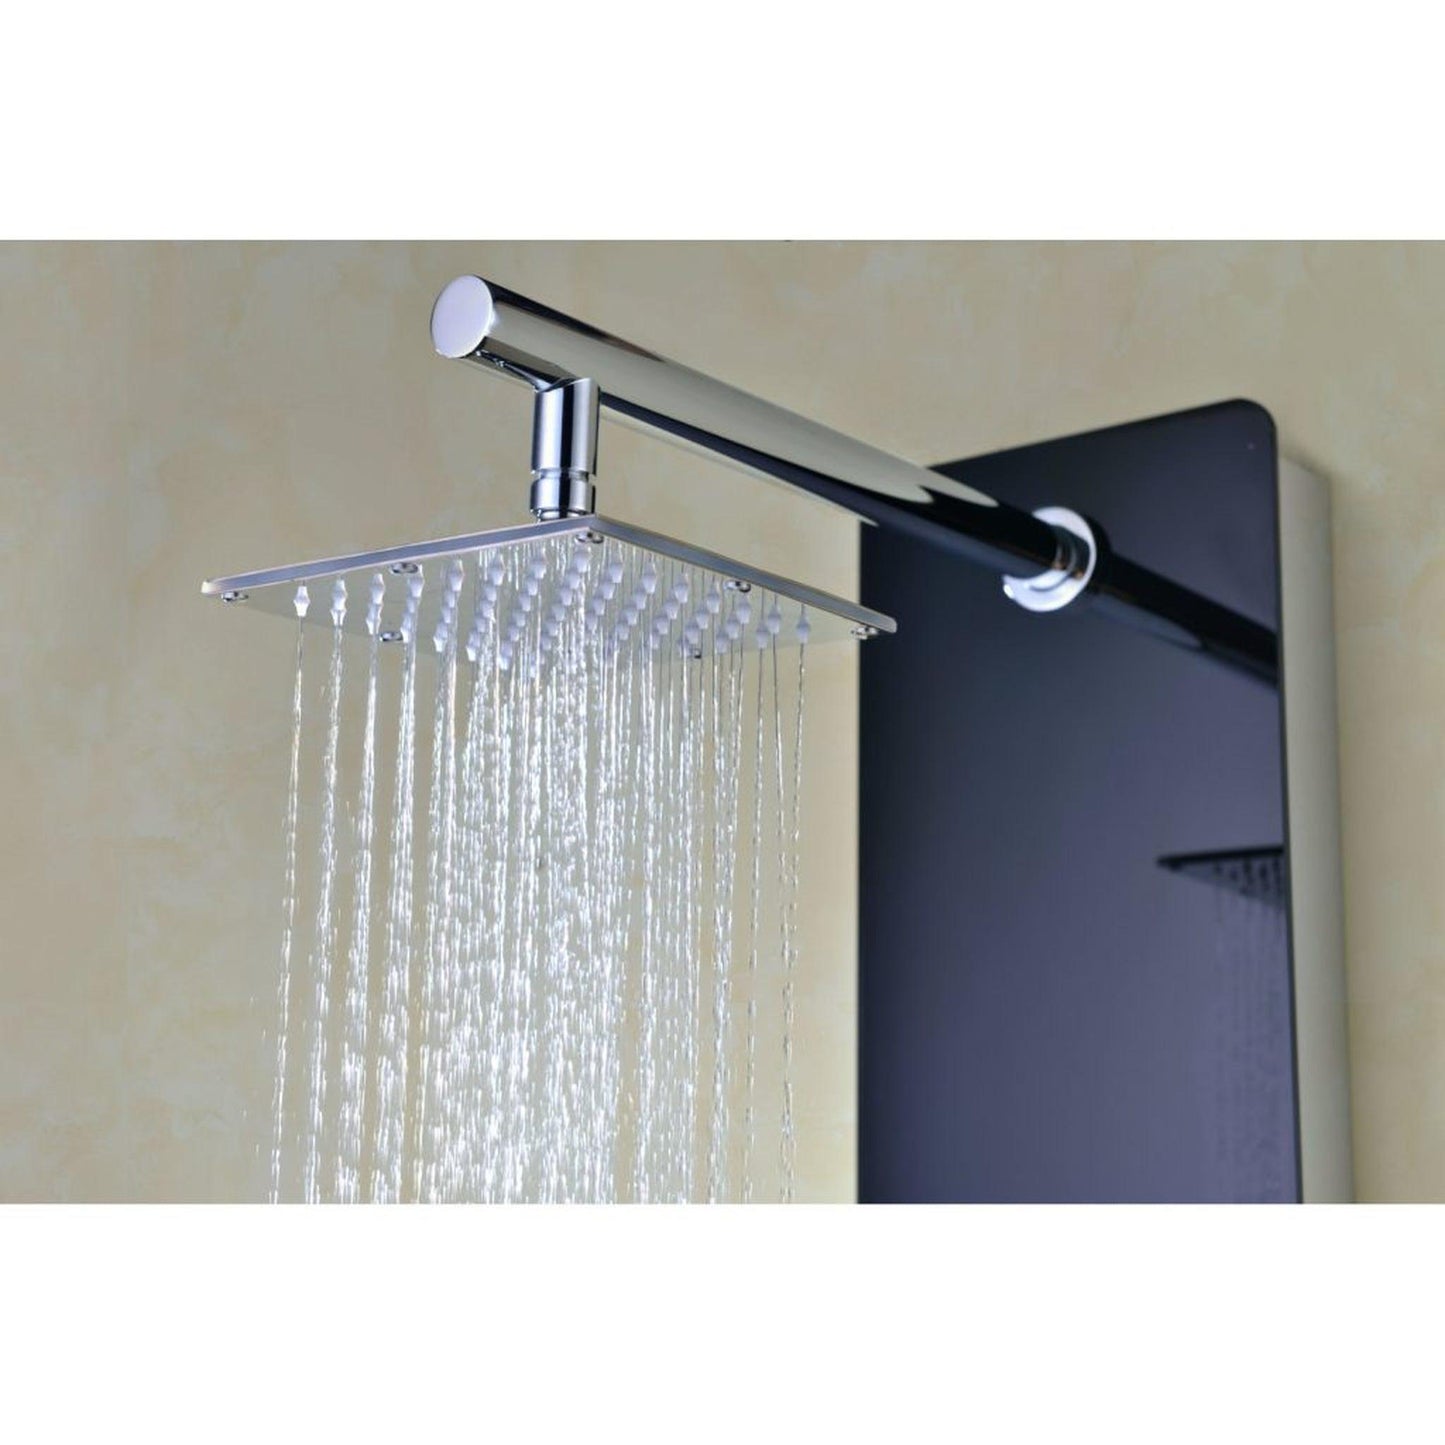 ANZZI Melody Series 59" Black 6-Jetted Full Body Shower Panel With Heavy Rain Shower Head and Euro-Grip Hand Sprayer